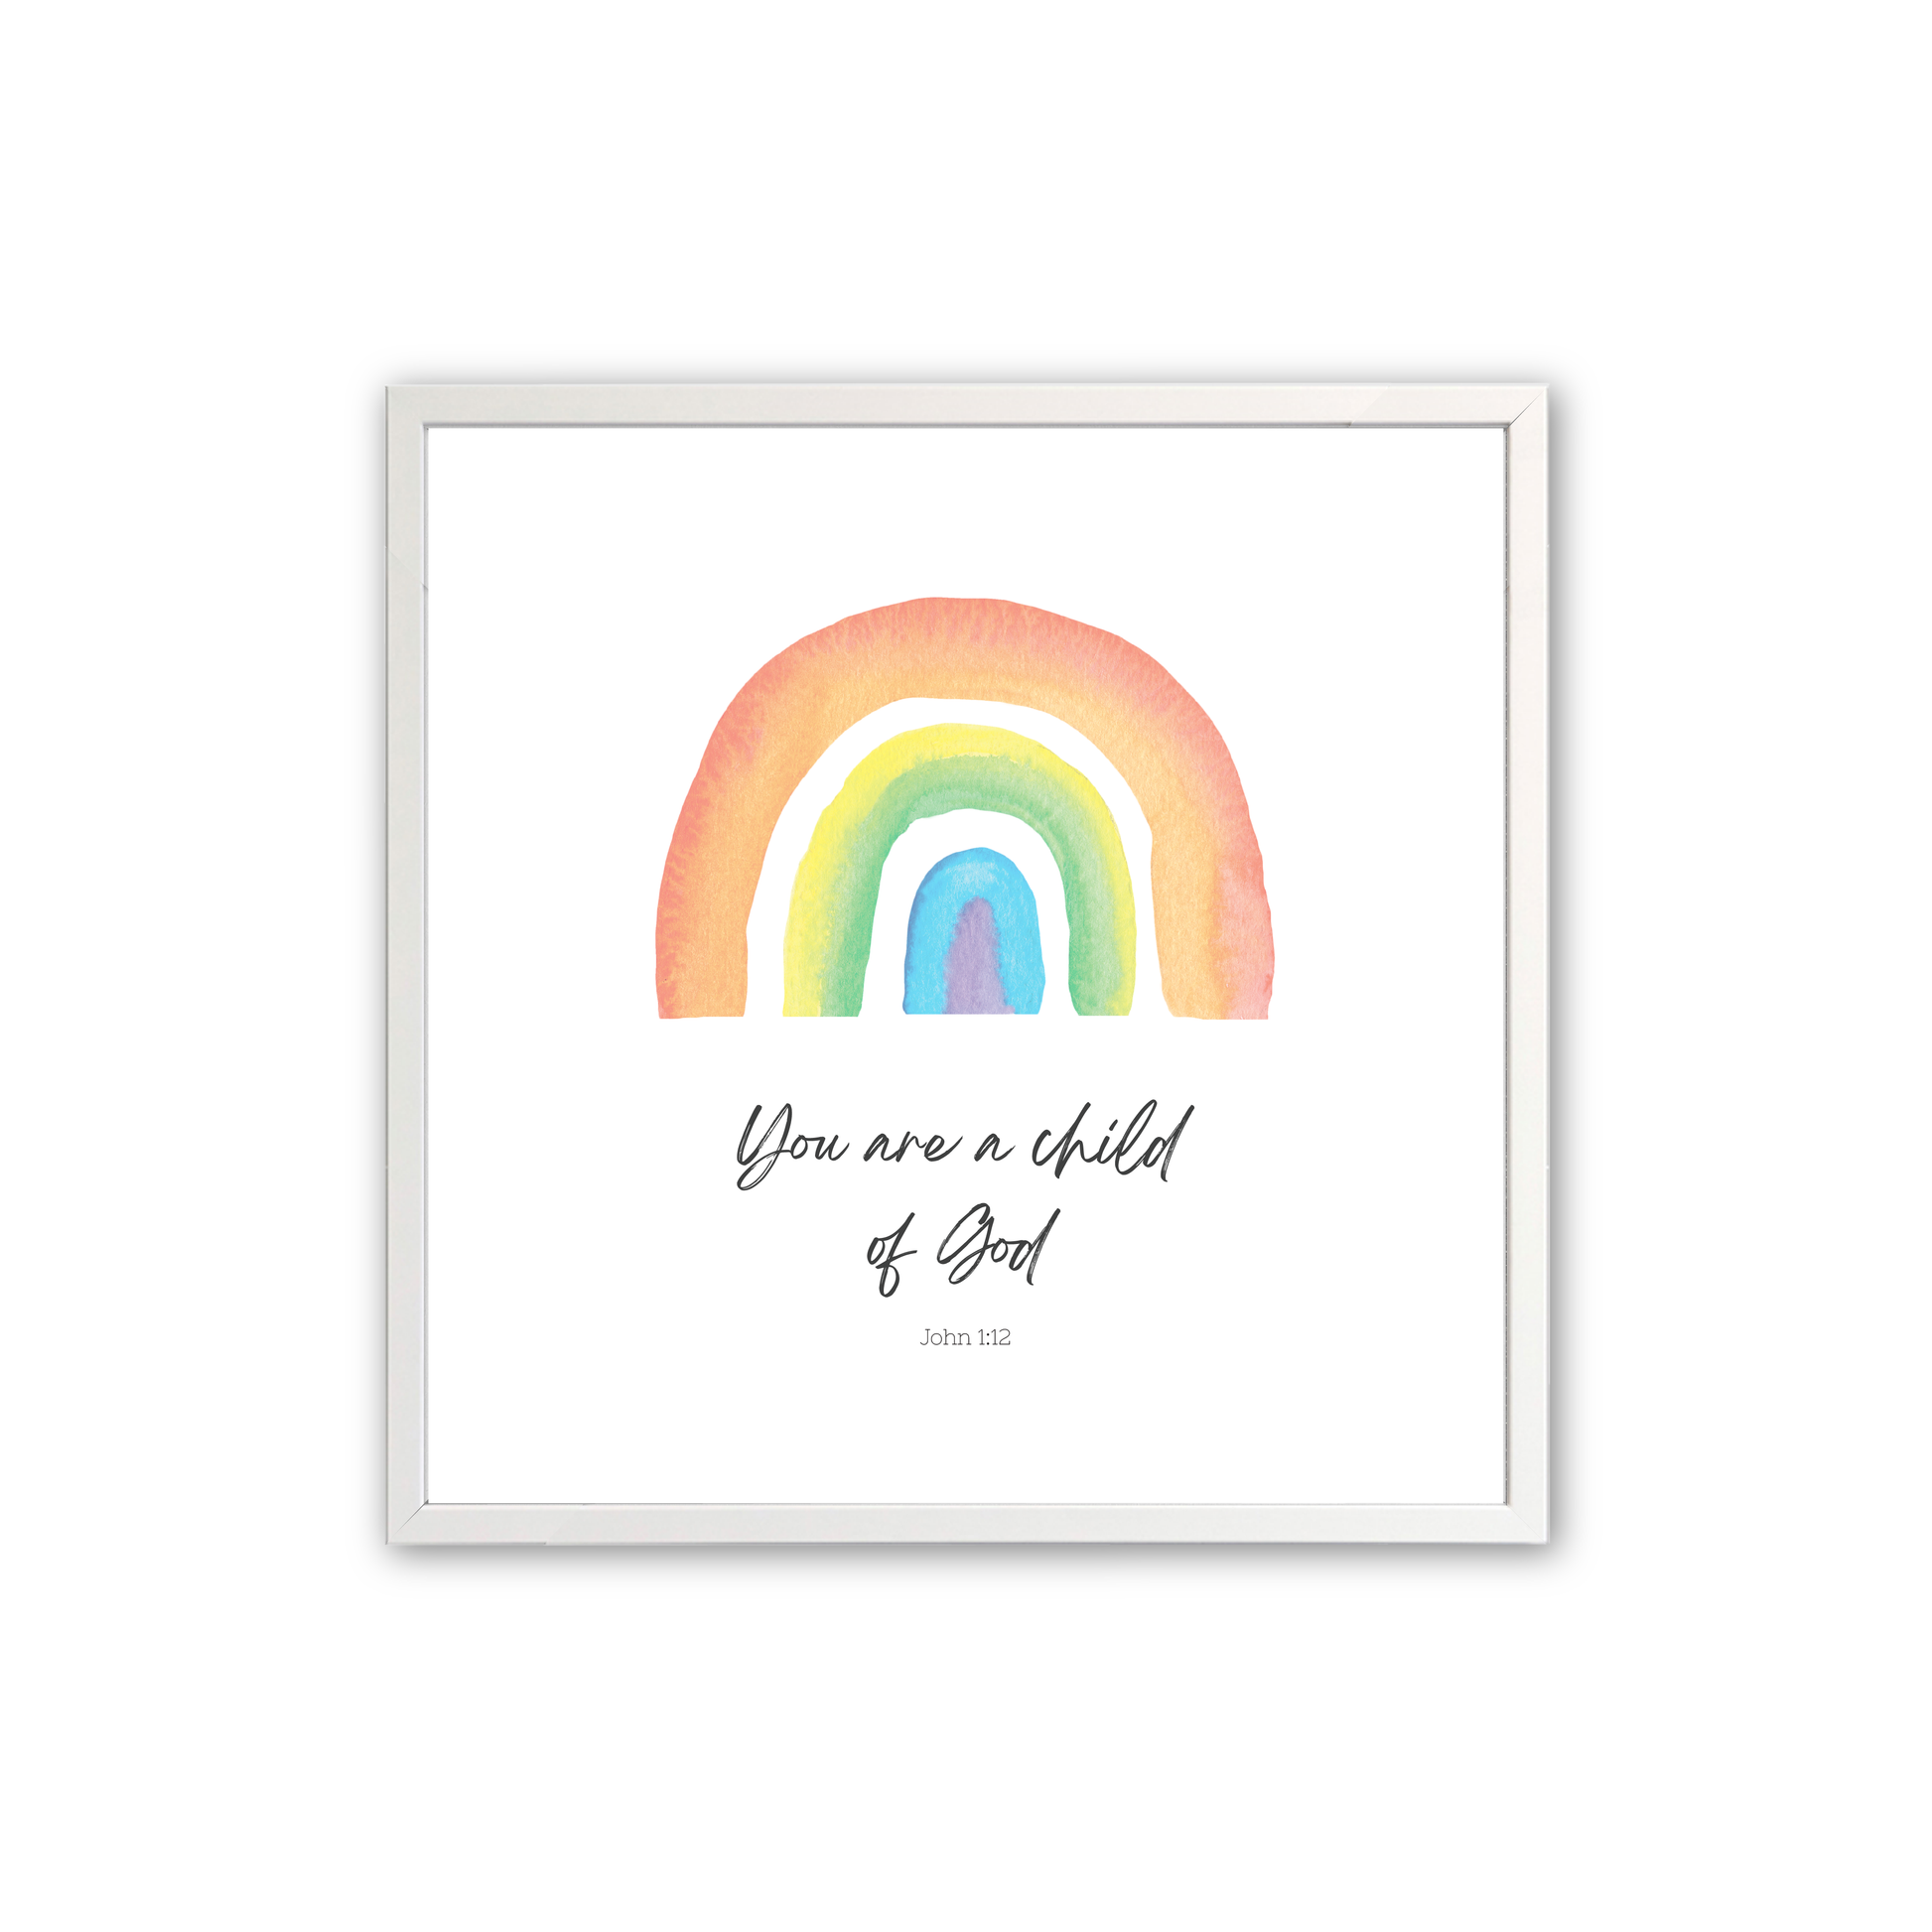 [color:Opaque White], Print 2 - You are a child of God